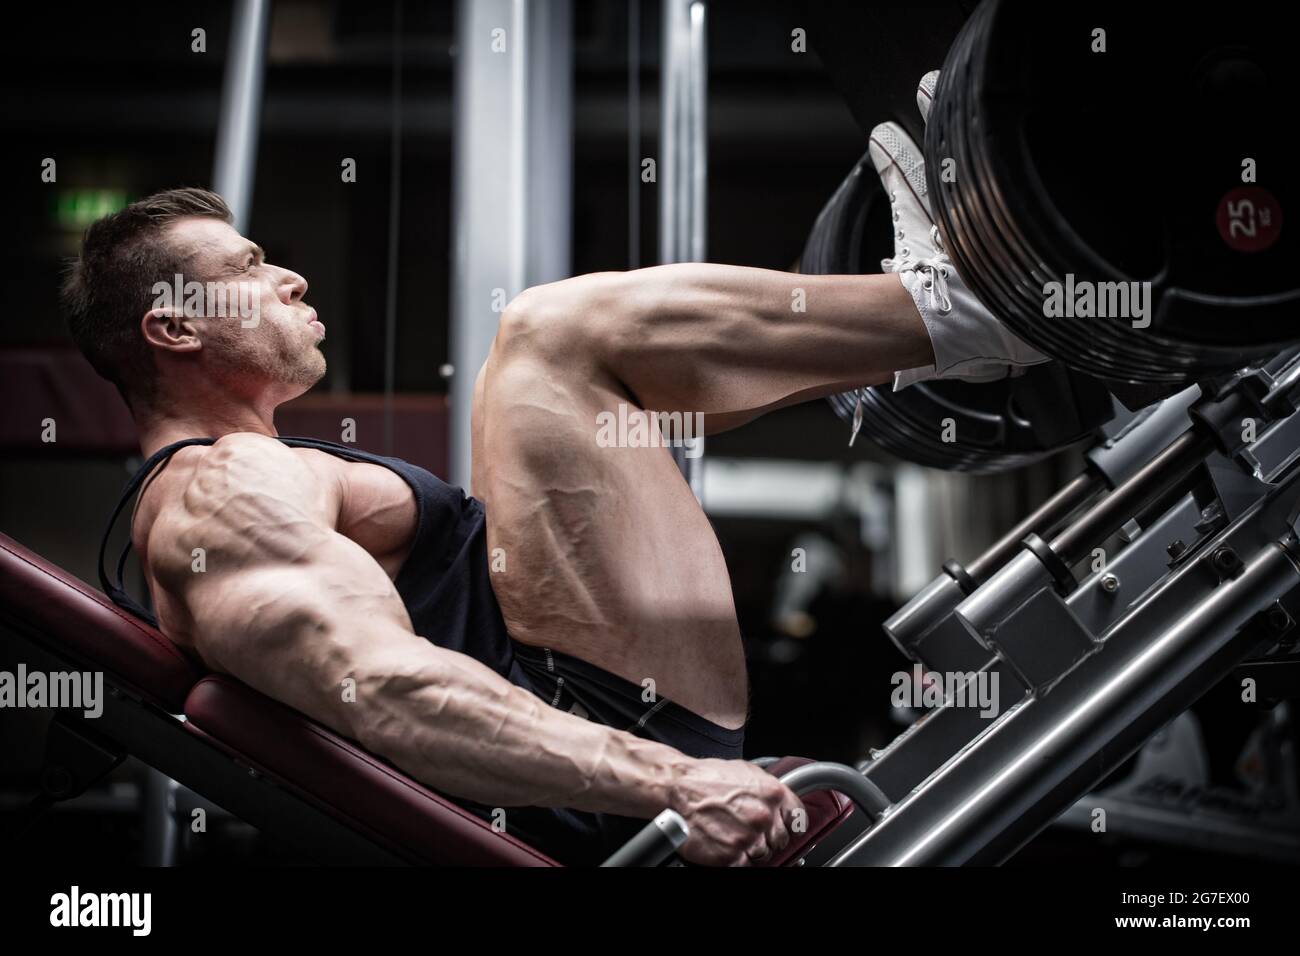 Man in gym training at leg press to define his upper leg muscles Stock Photo